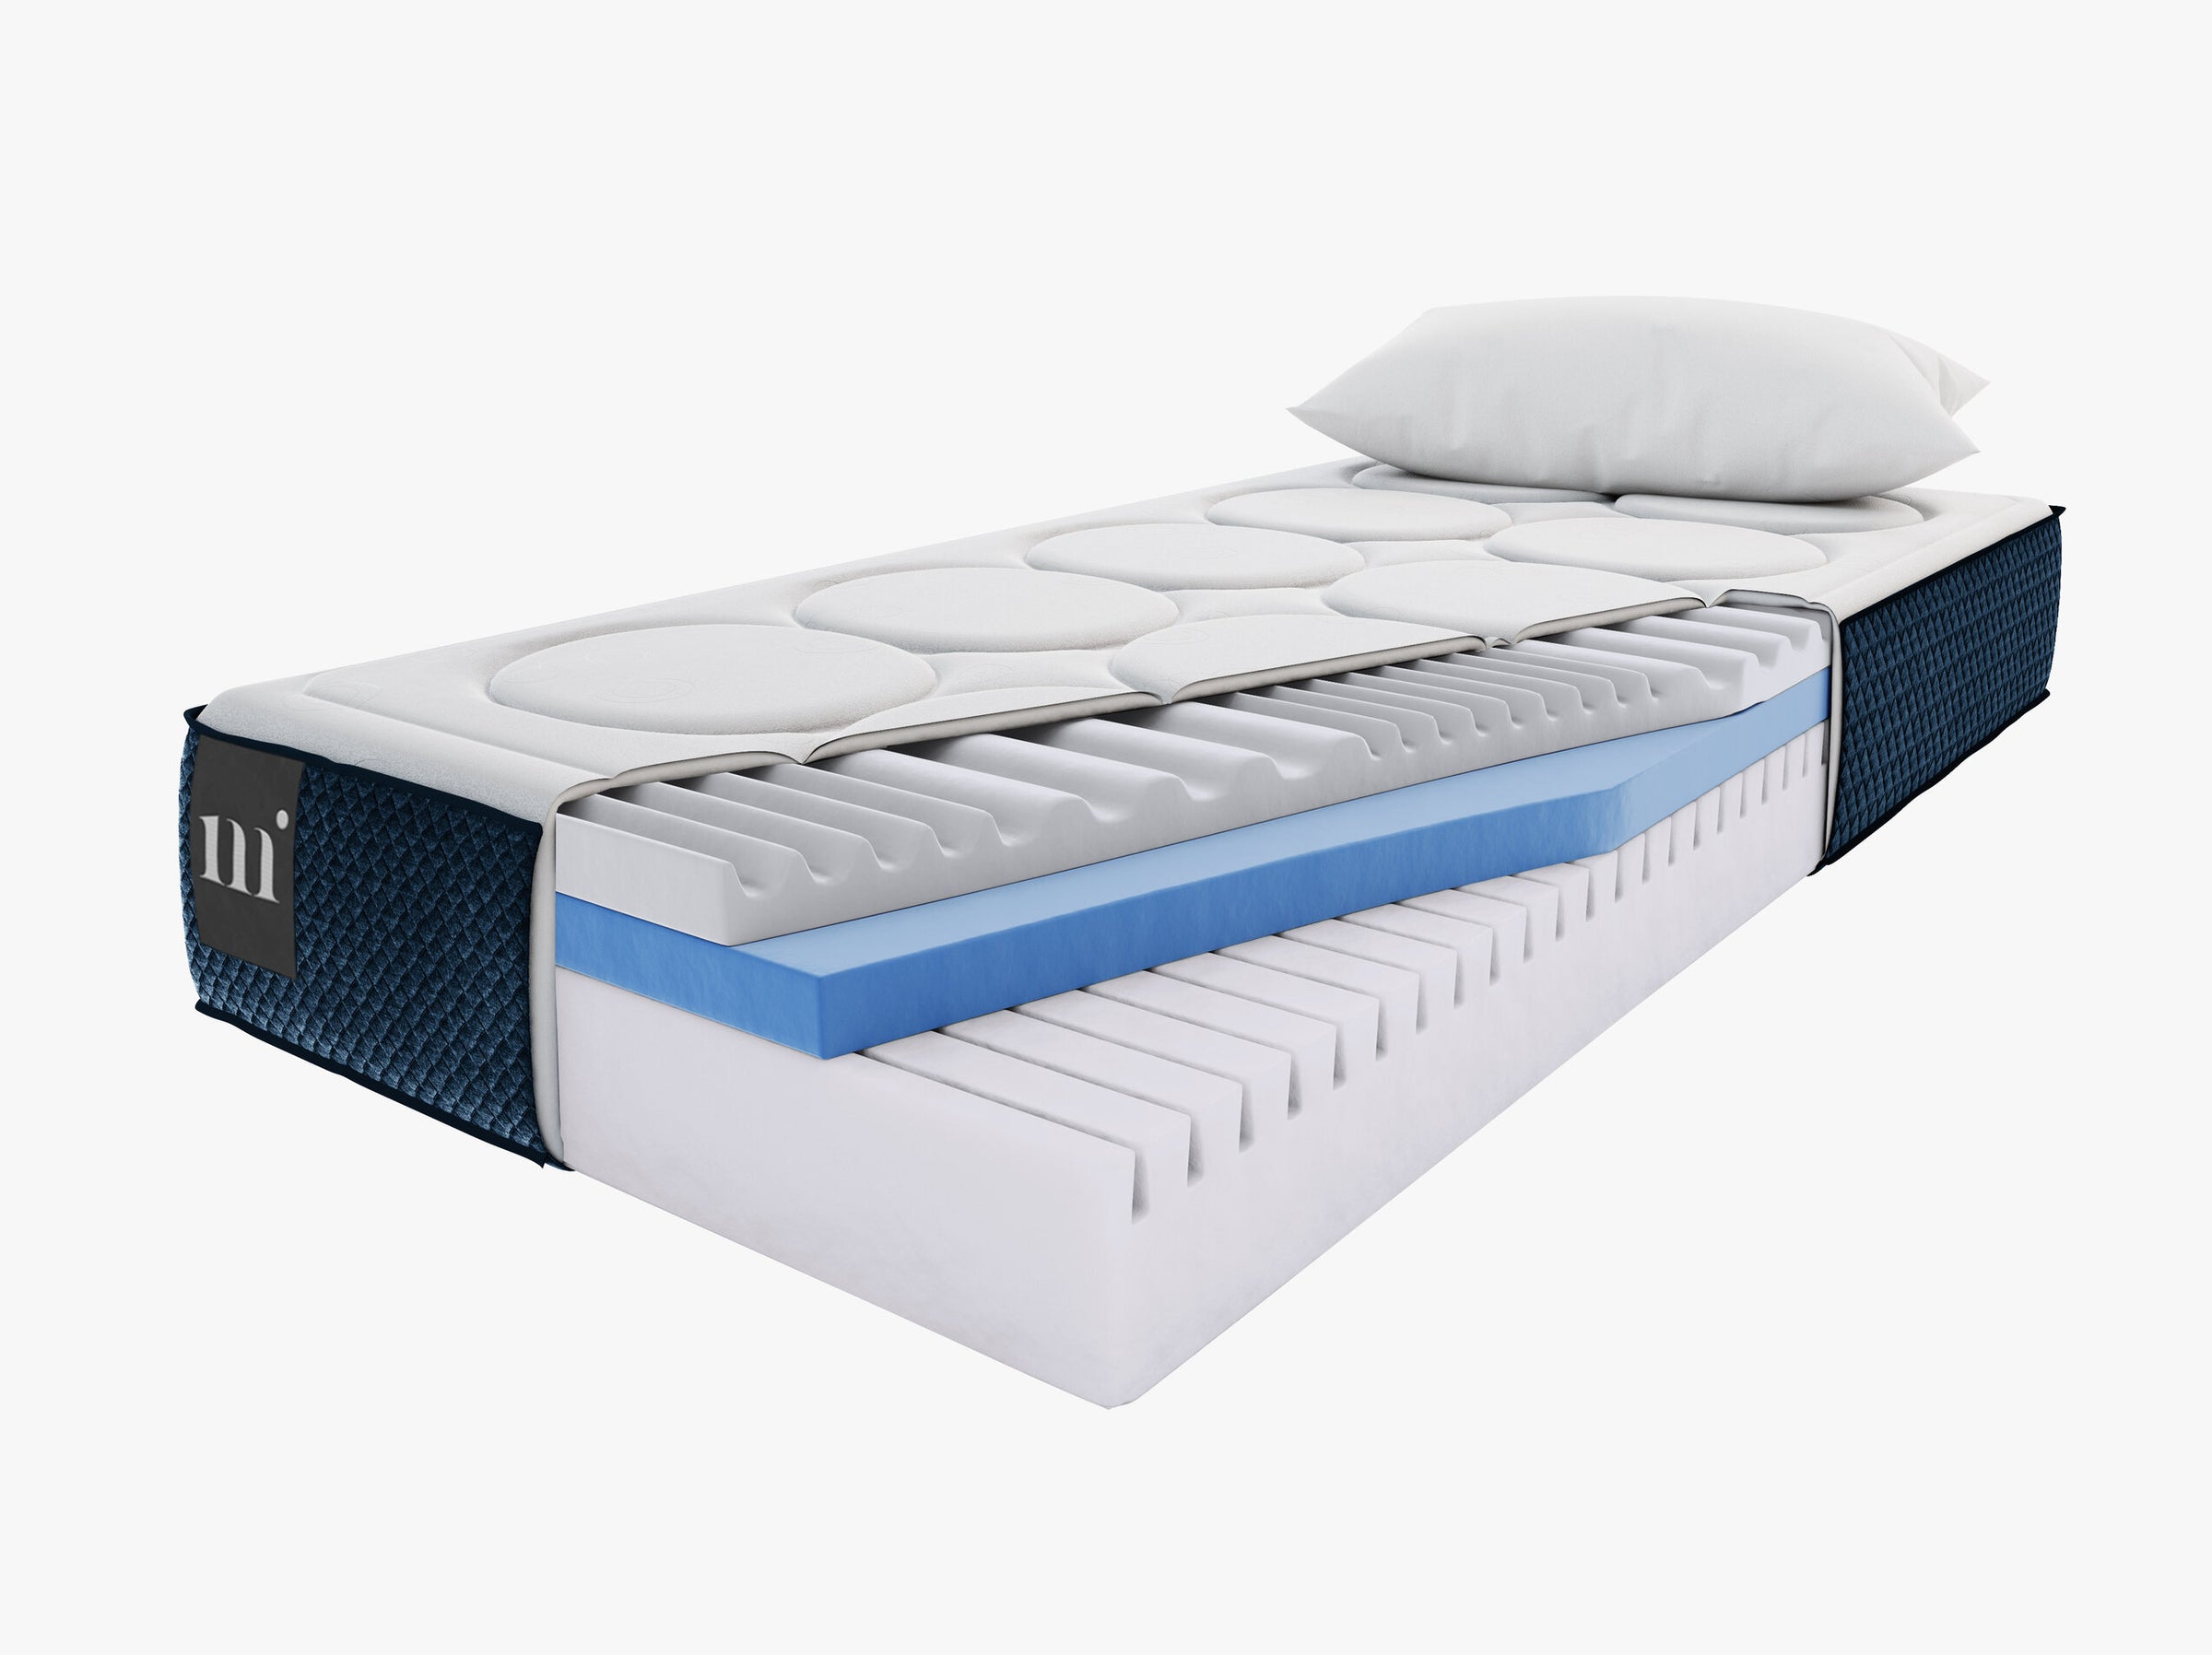 Kavaja beds & mattresses structured fabric white and blue